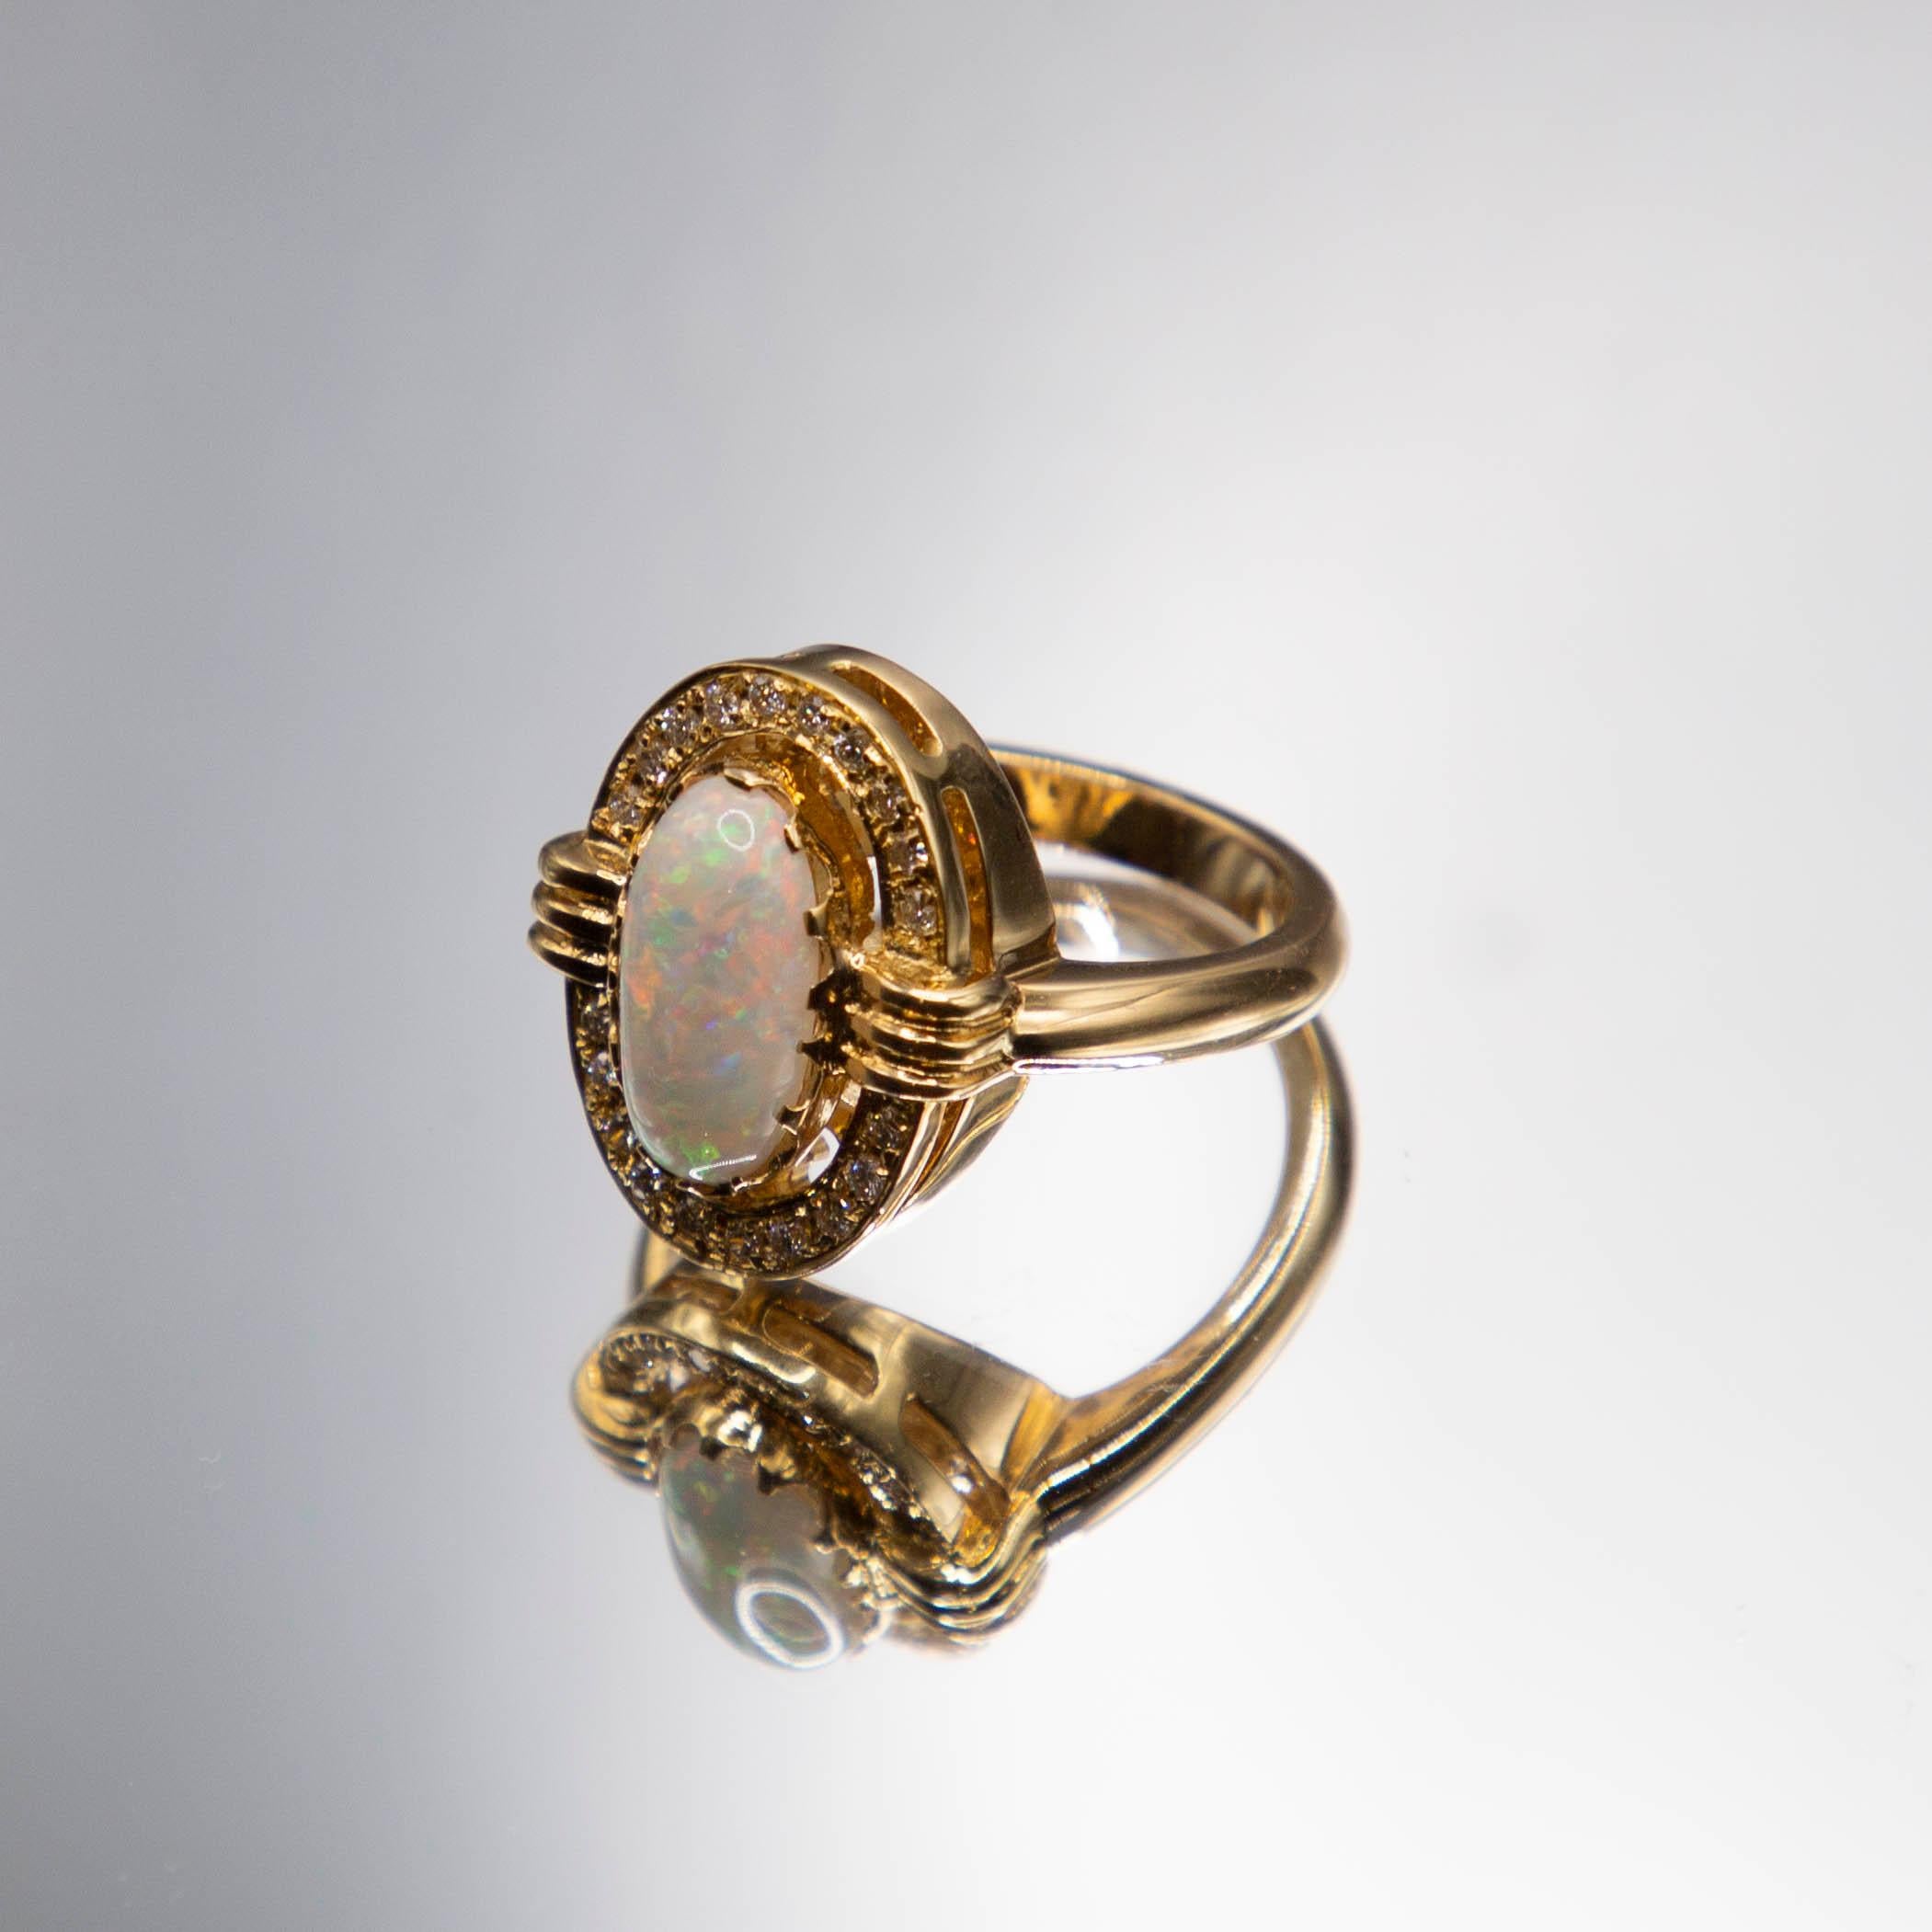 A one -of-a-kind 18k yellow gold ring features a highly sought- after Lightning Ridge Red Flash opal at just under 2 carats. The mesmerizing and truly intense play of color predominates in the hot colors then rolls into stunning cool blues and